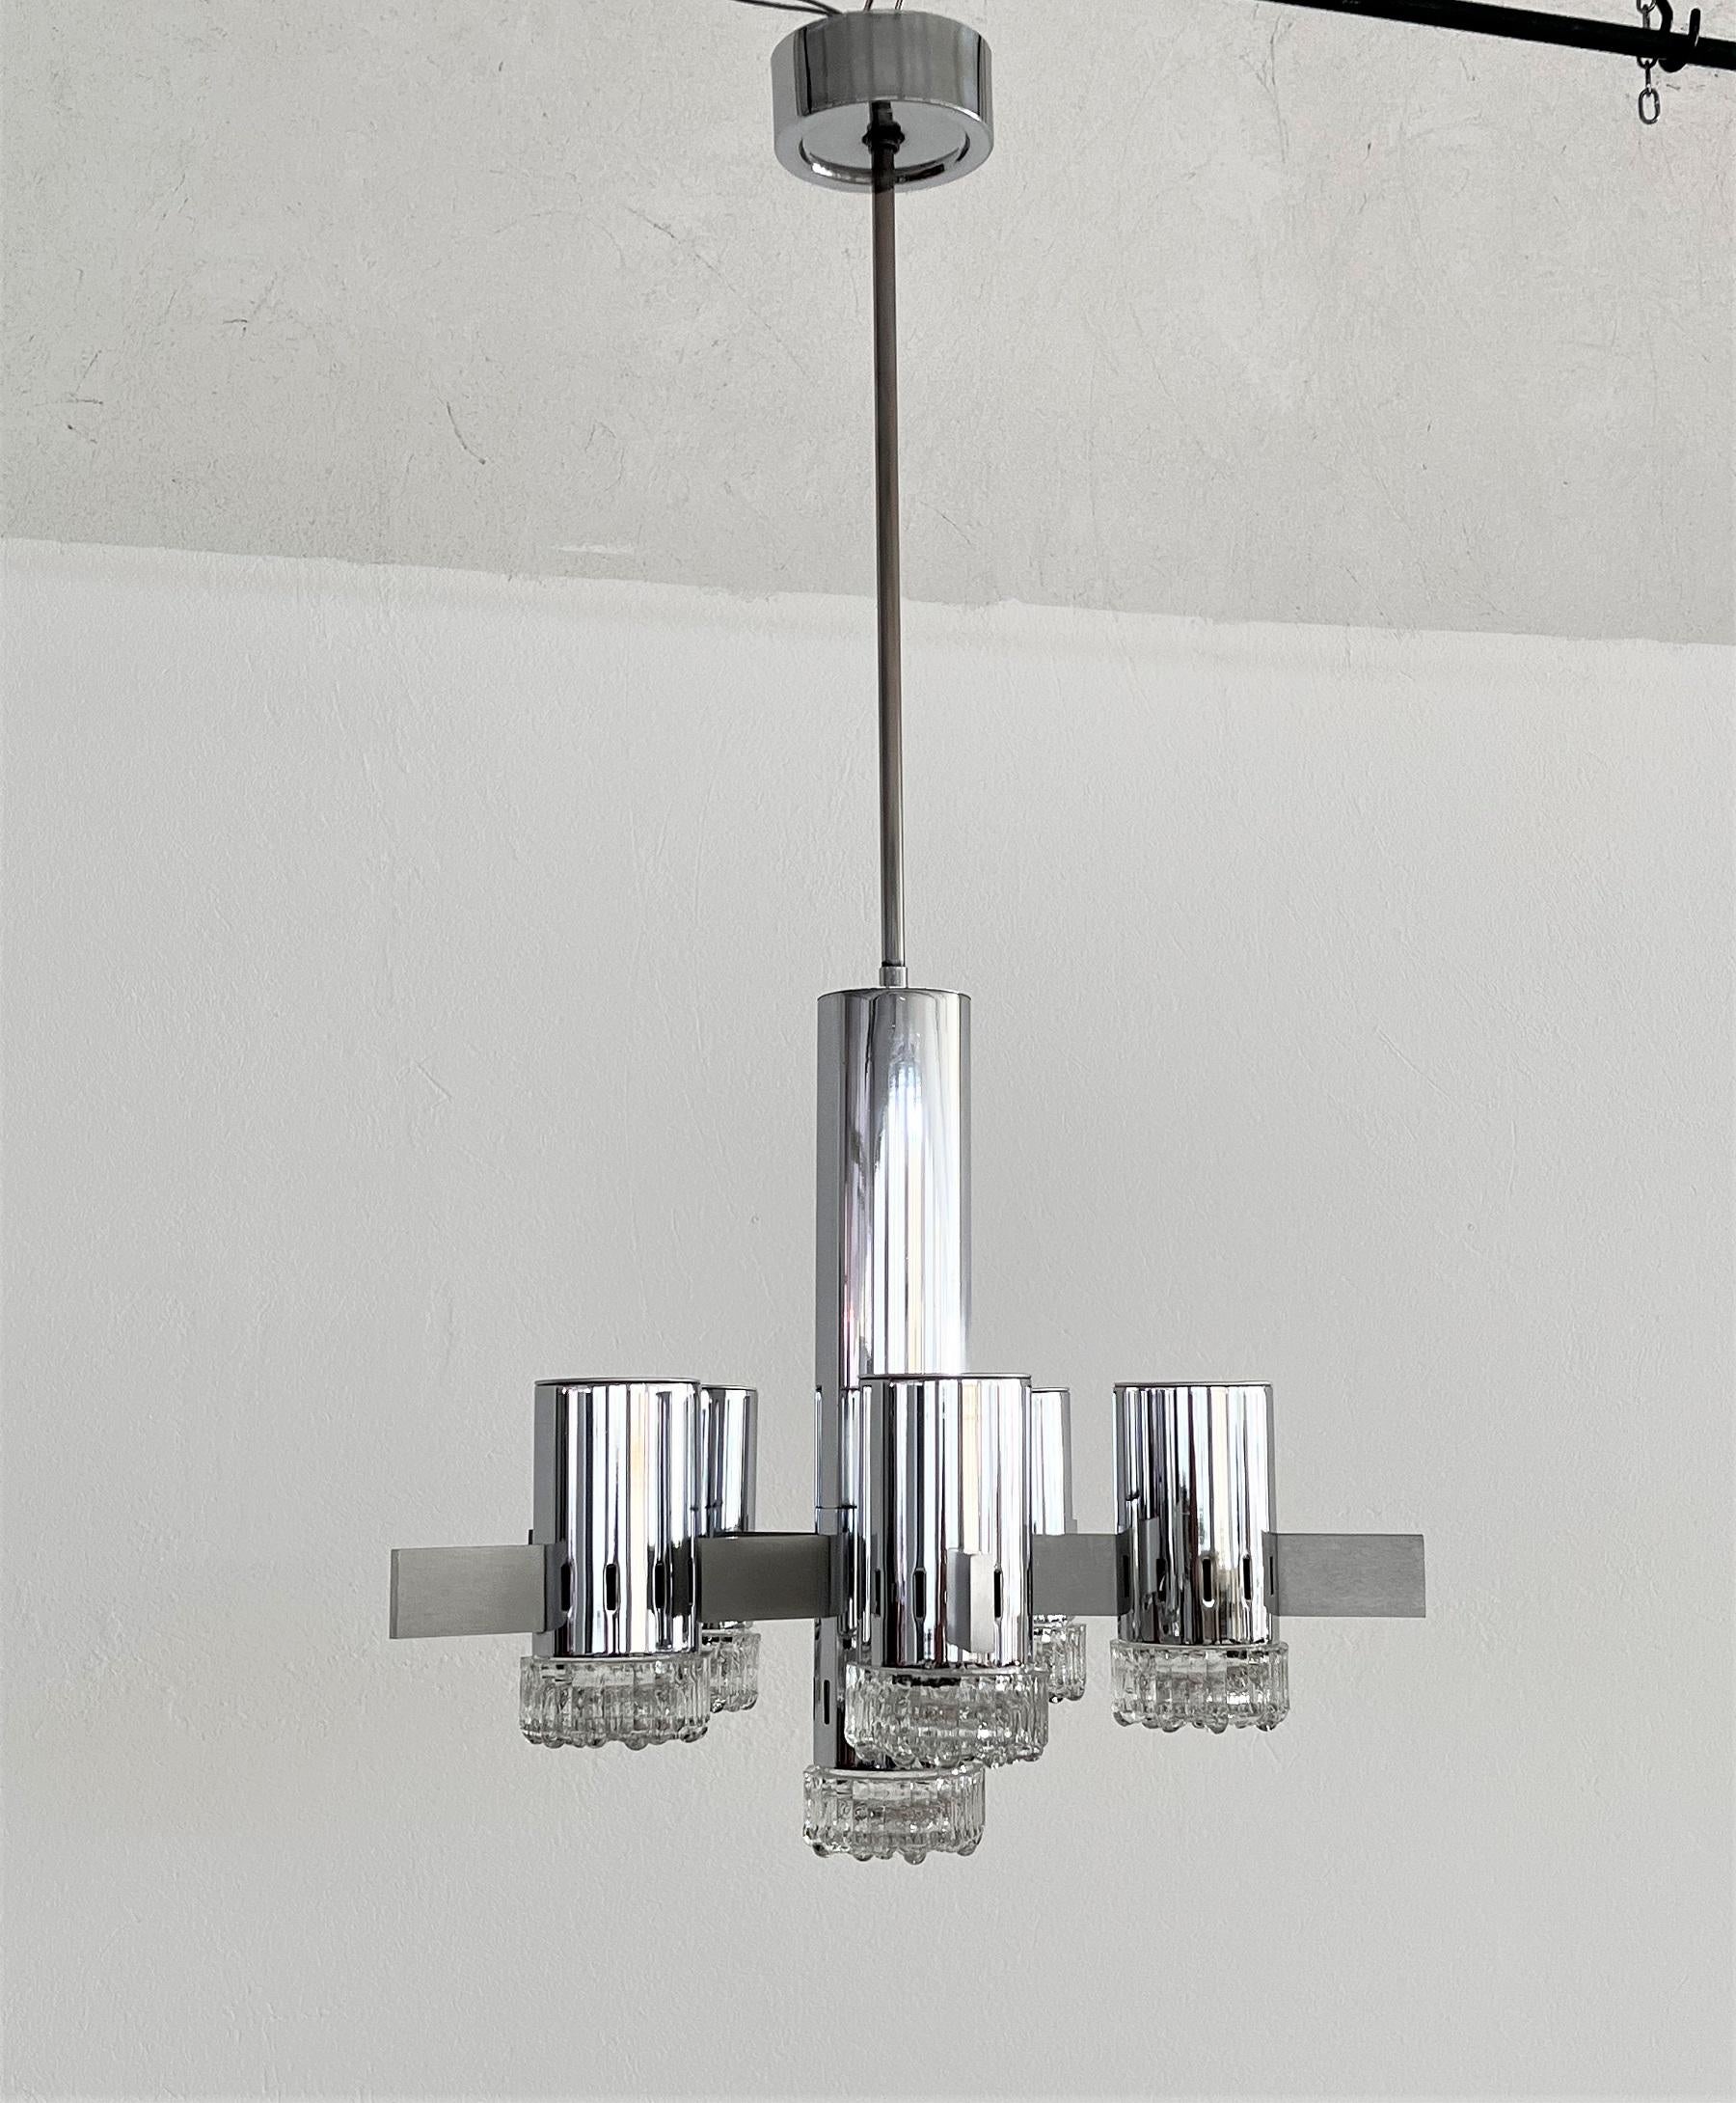 Mid-20th Century Italian Large Mid-Century Chrome and Glass Sputnik Chandelier by Sciolari, 1960s For Sale